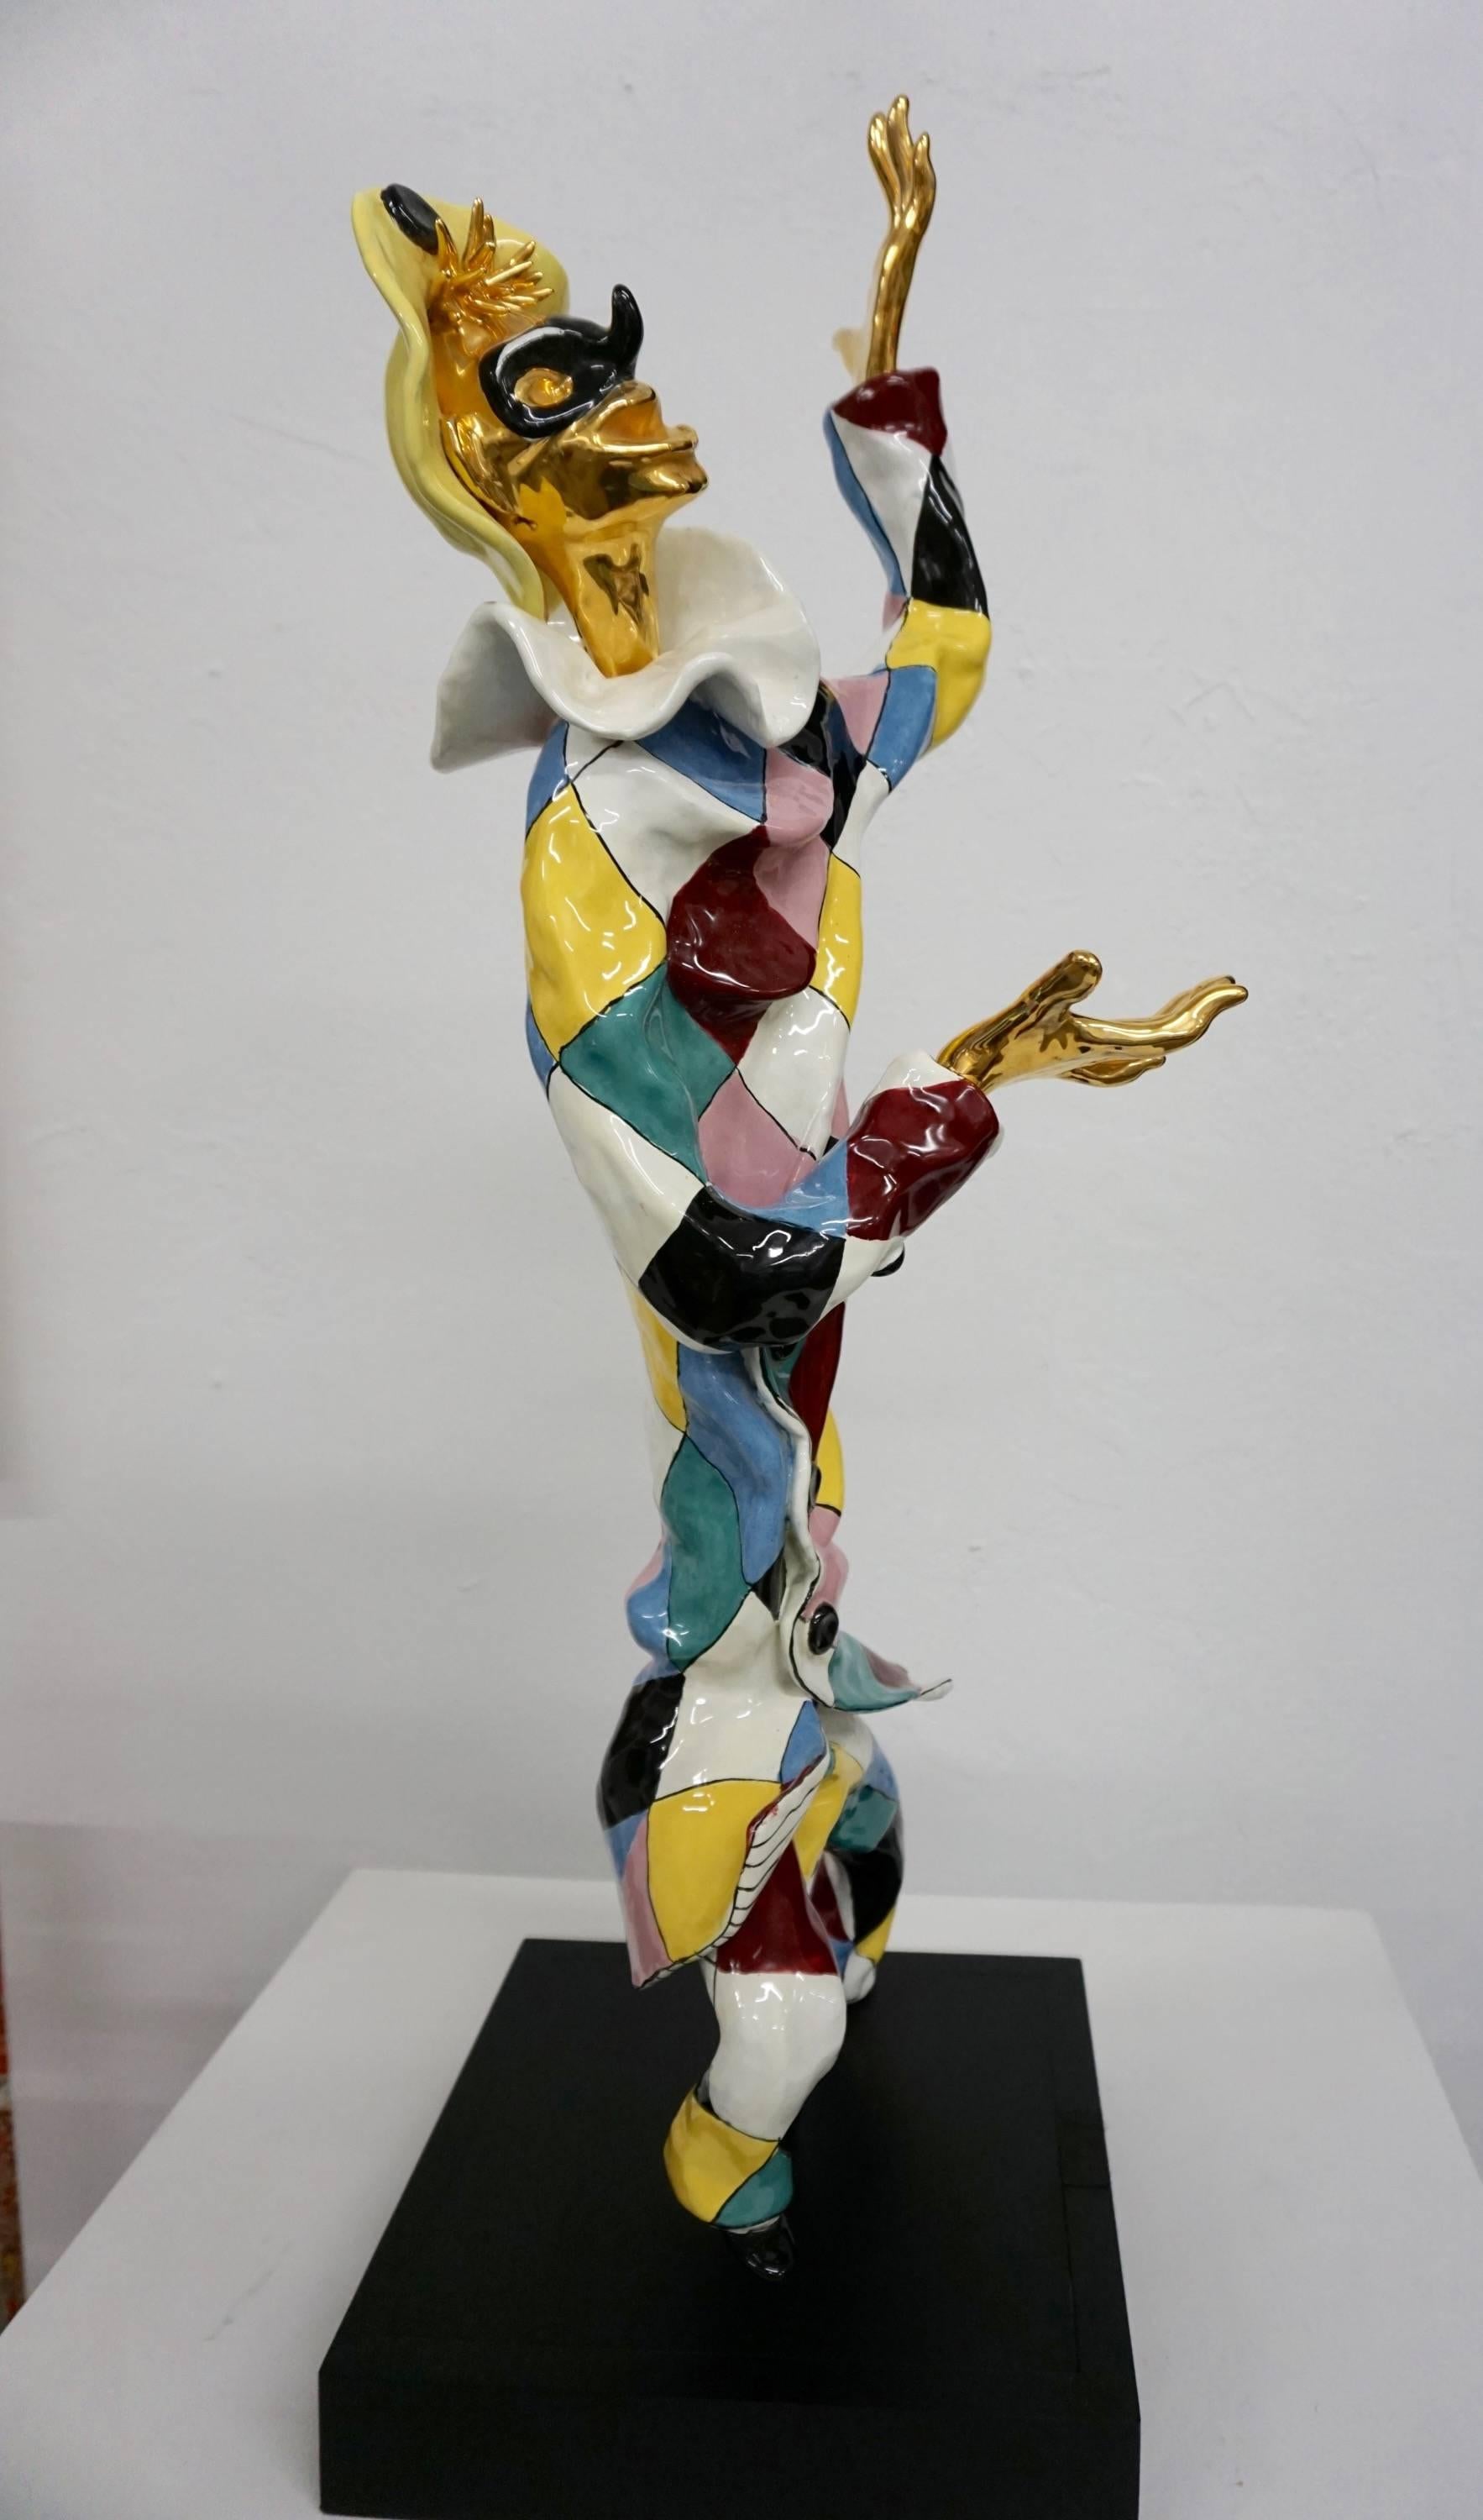 Mid-20th Century Harlequin Jester Sculpture by San Polo Ceramics, Italy